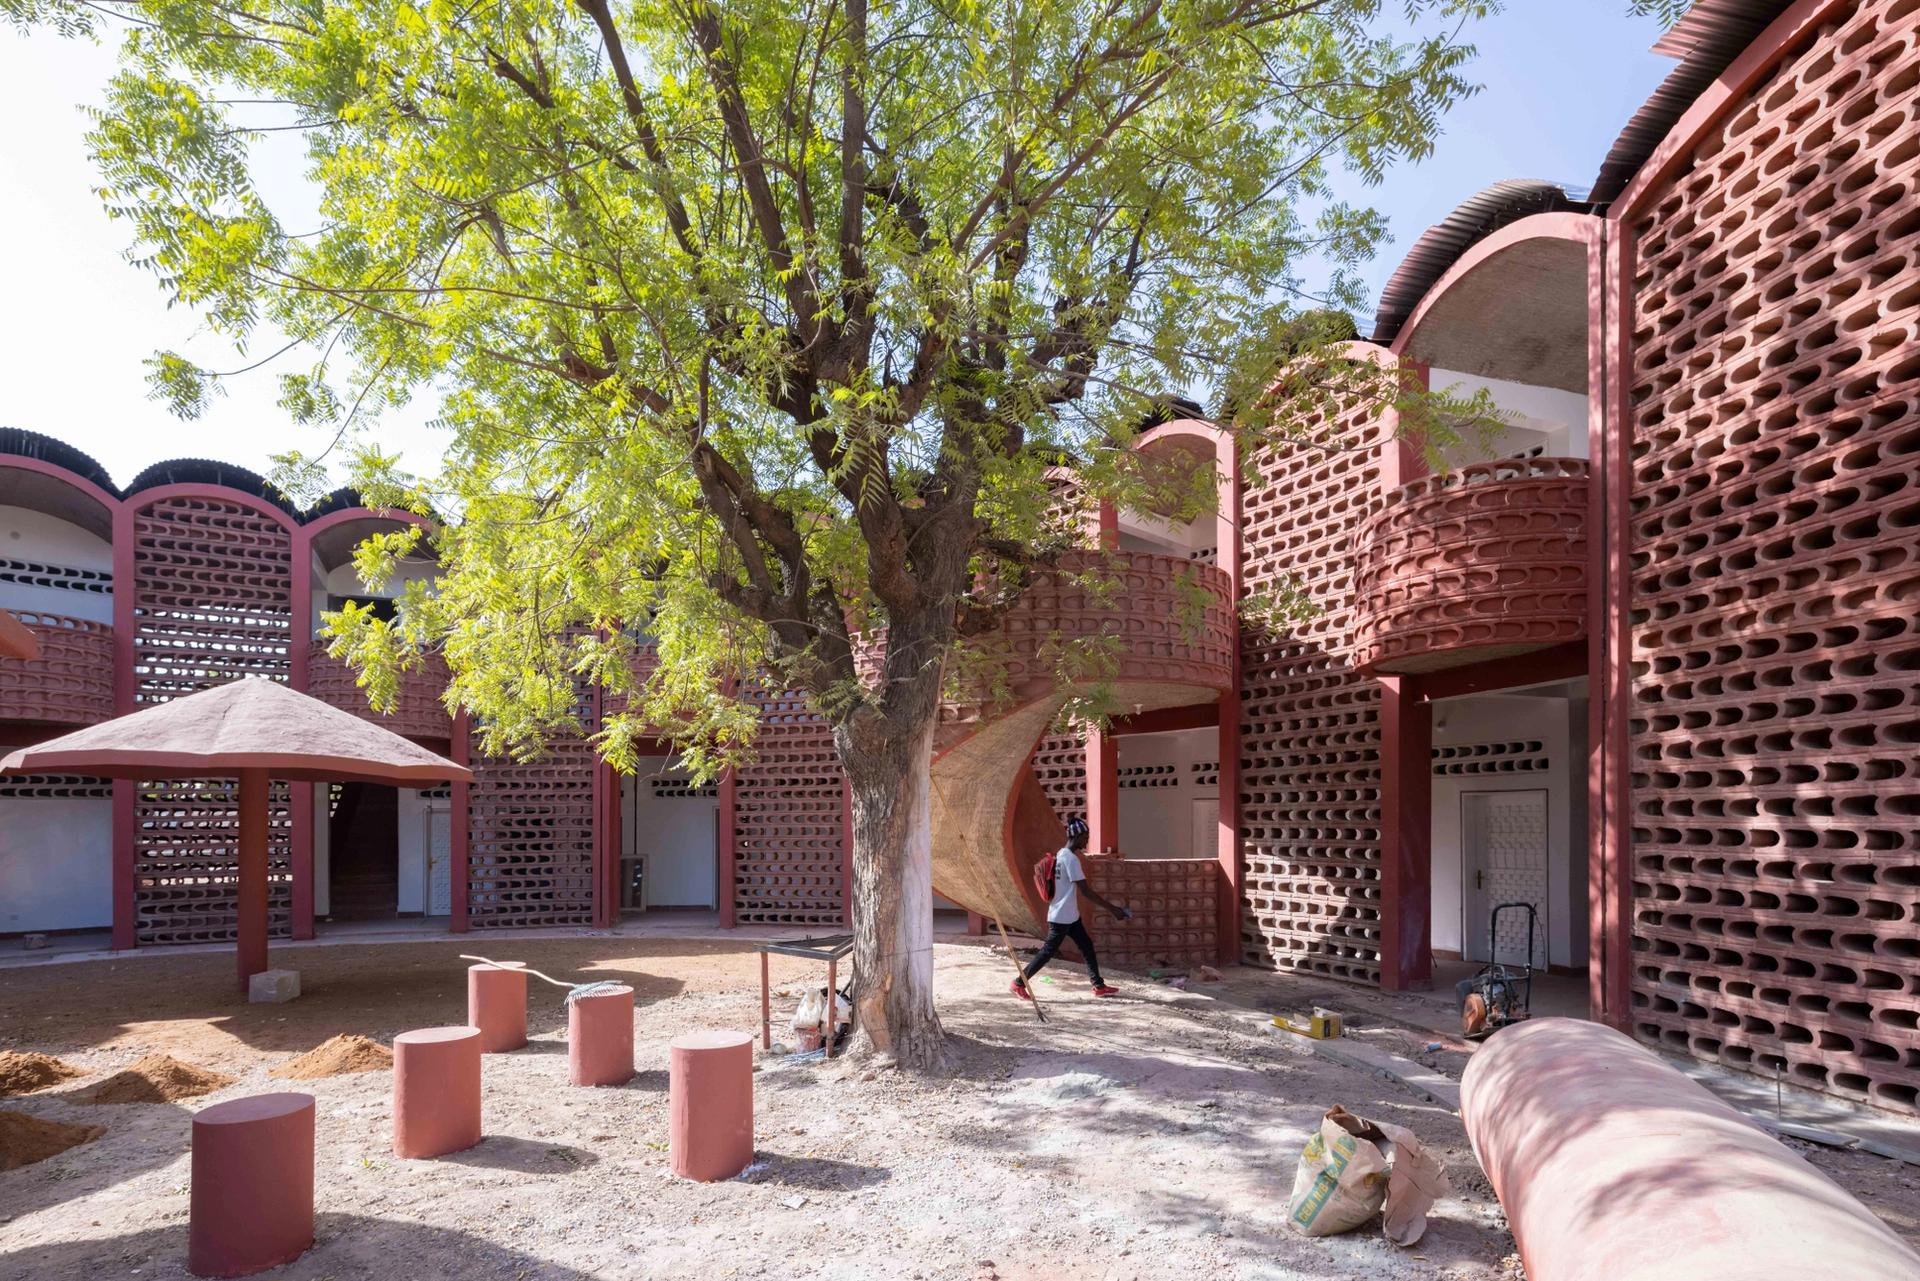 The maternity and paediatric hospital in Tambacounda, Senegal, designed by Manuel Herz Photo: Iwan Baan. Courtesy of the Josef and Anni Albers Foundation and Le Korsa